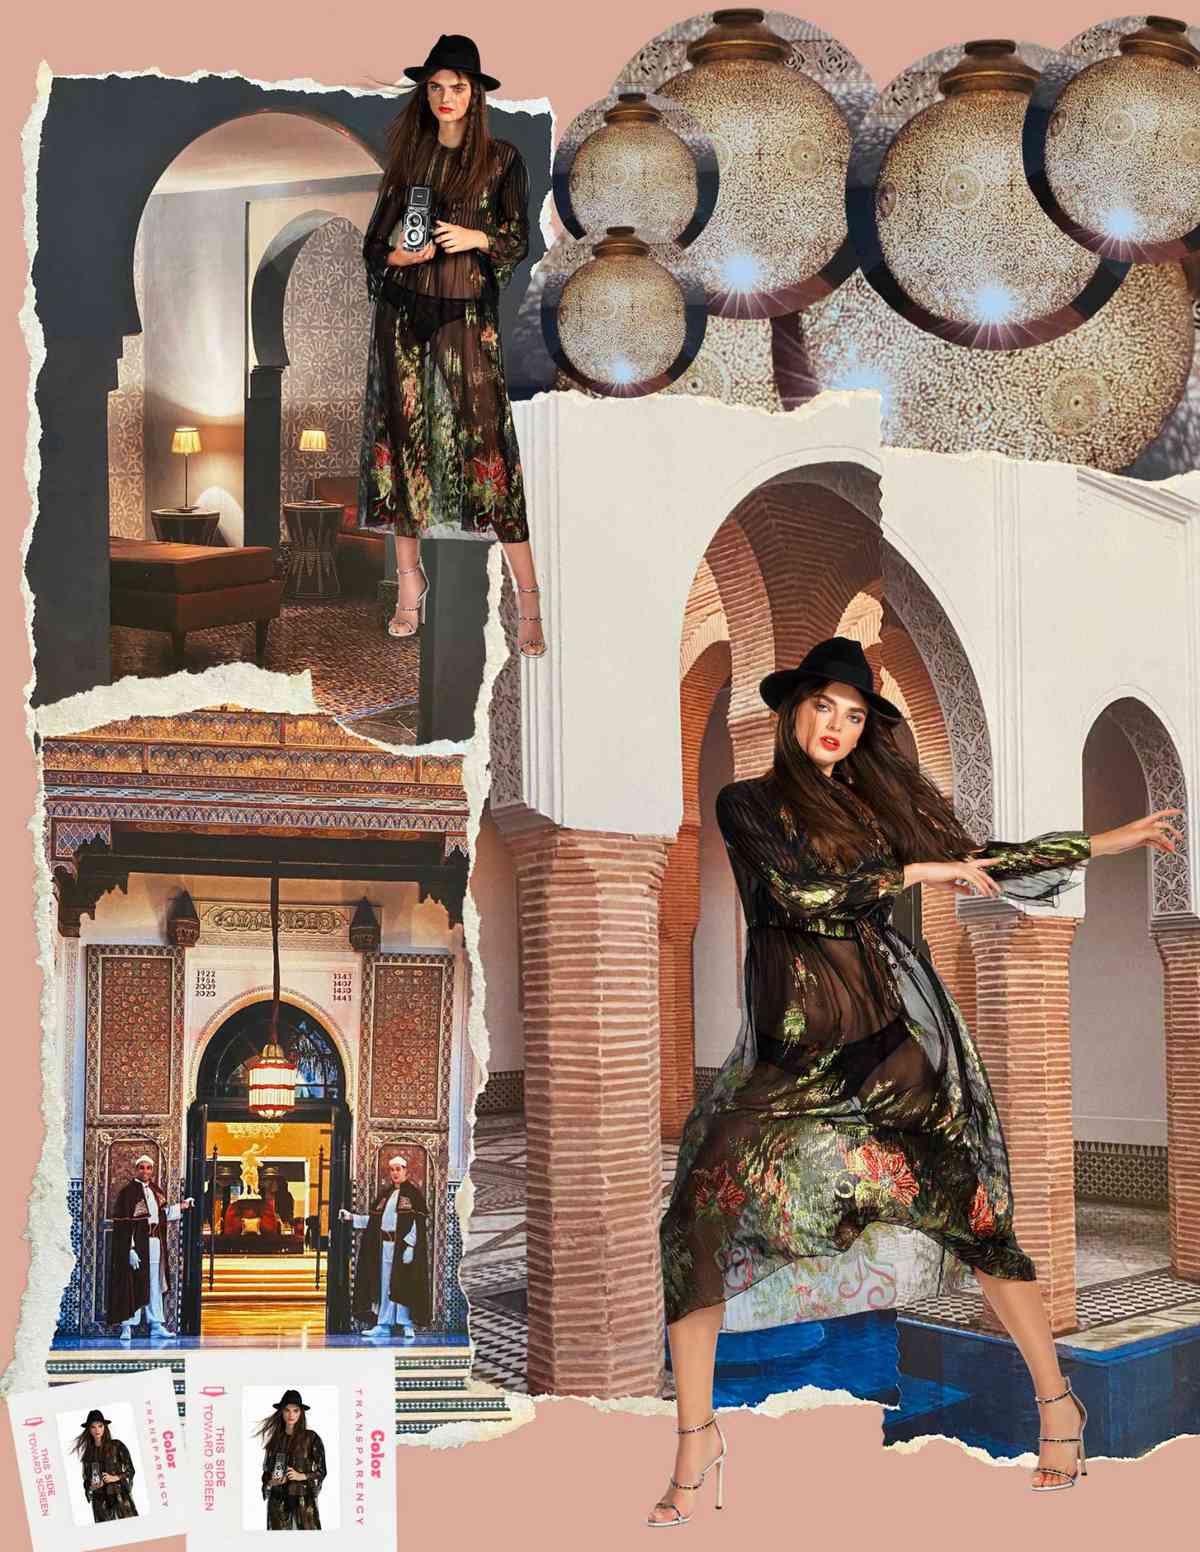 Photos of a model wearing a sheer black dress are superimposed over images of the hotel La Mamounia